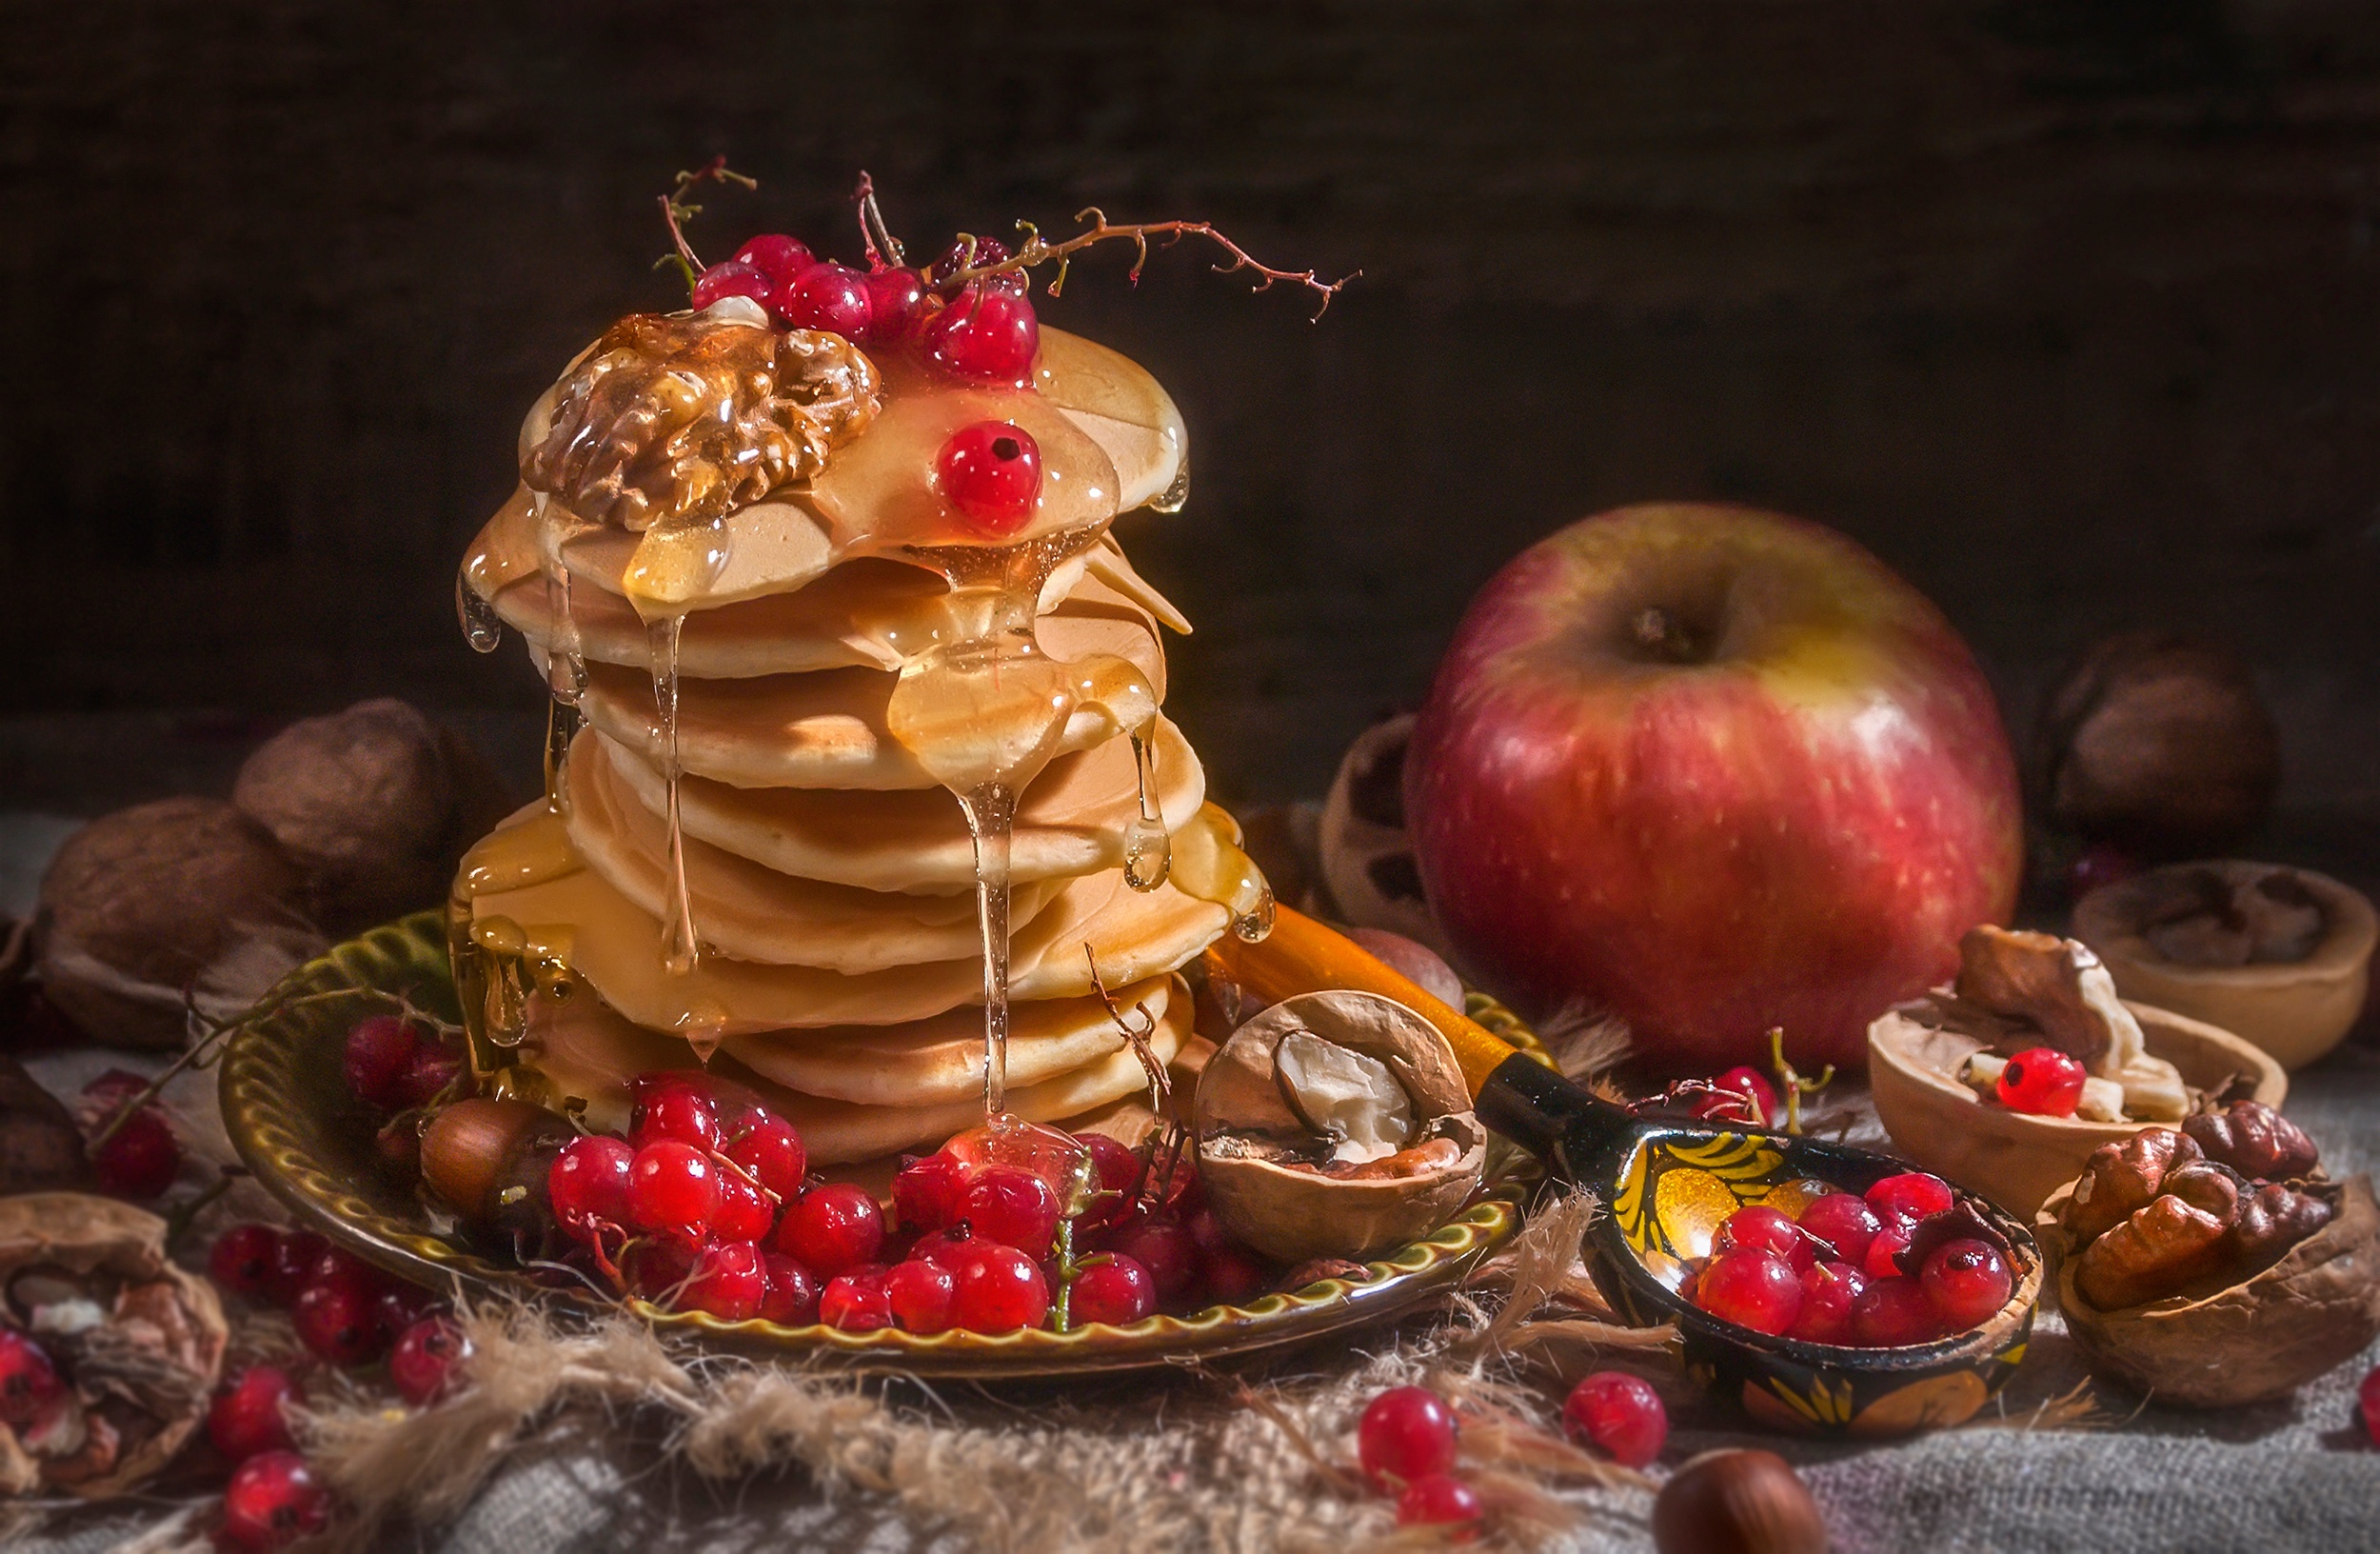 General 2500x1632 food sweets pancakes honey apples fruit berries red currant walnuts syrup